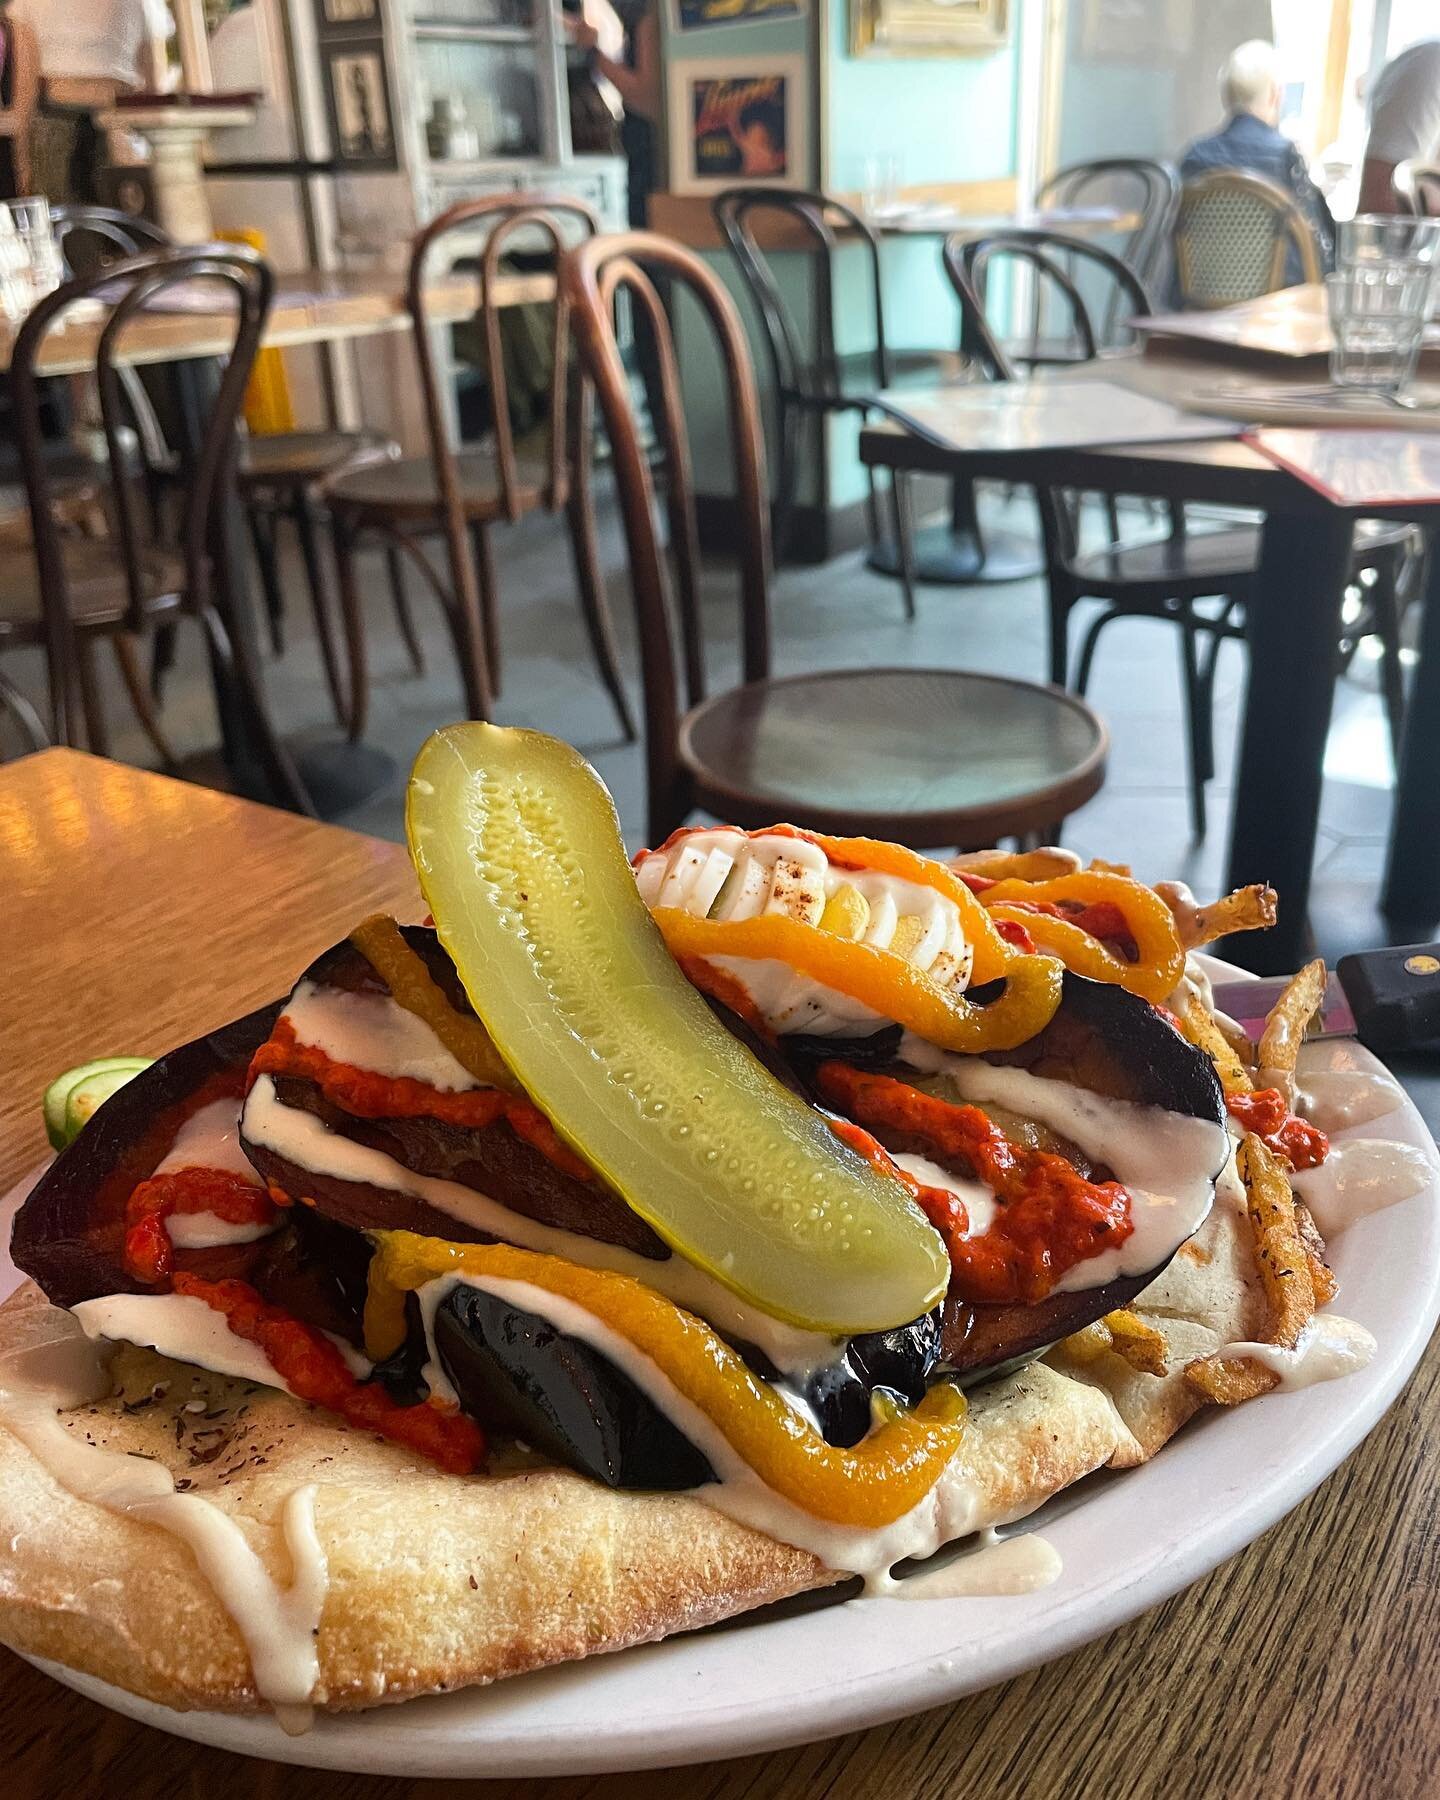 I don&rsquo;t often post photos of a single dish, but this Sabich Flatbread from @fet_zun was too good to resist 🤤 the eggplant was perfectly cooked and with the za&rsquo;atar fries&hellip;. Perfection 😍 

Send this post to the friend you&rsquo;re 